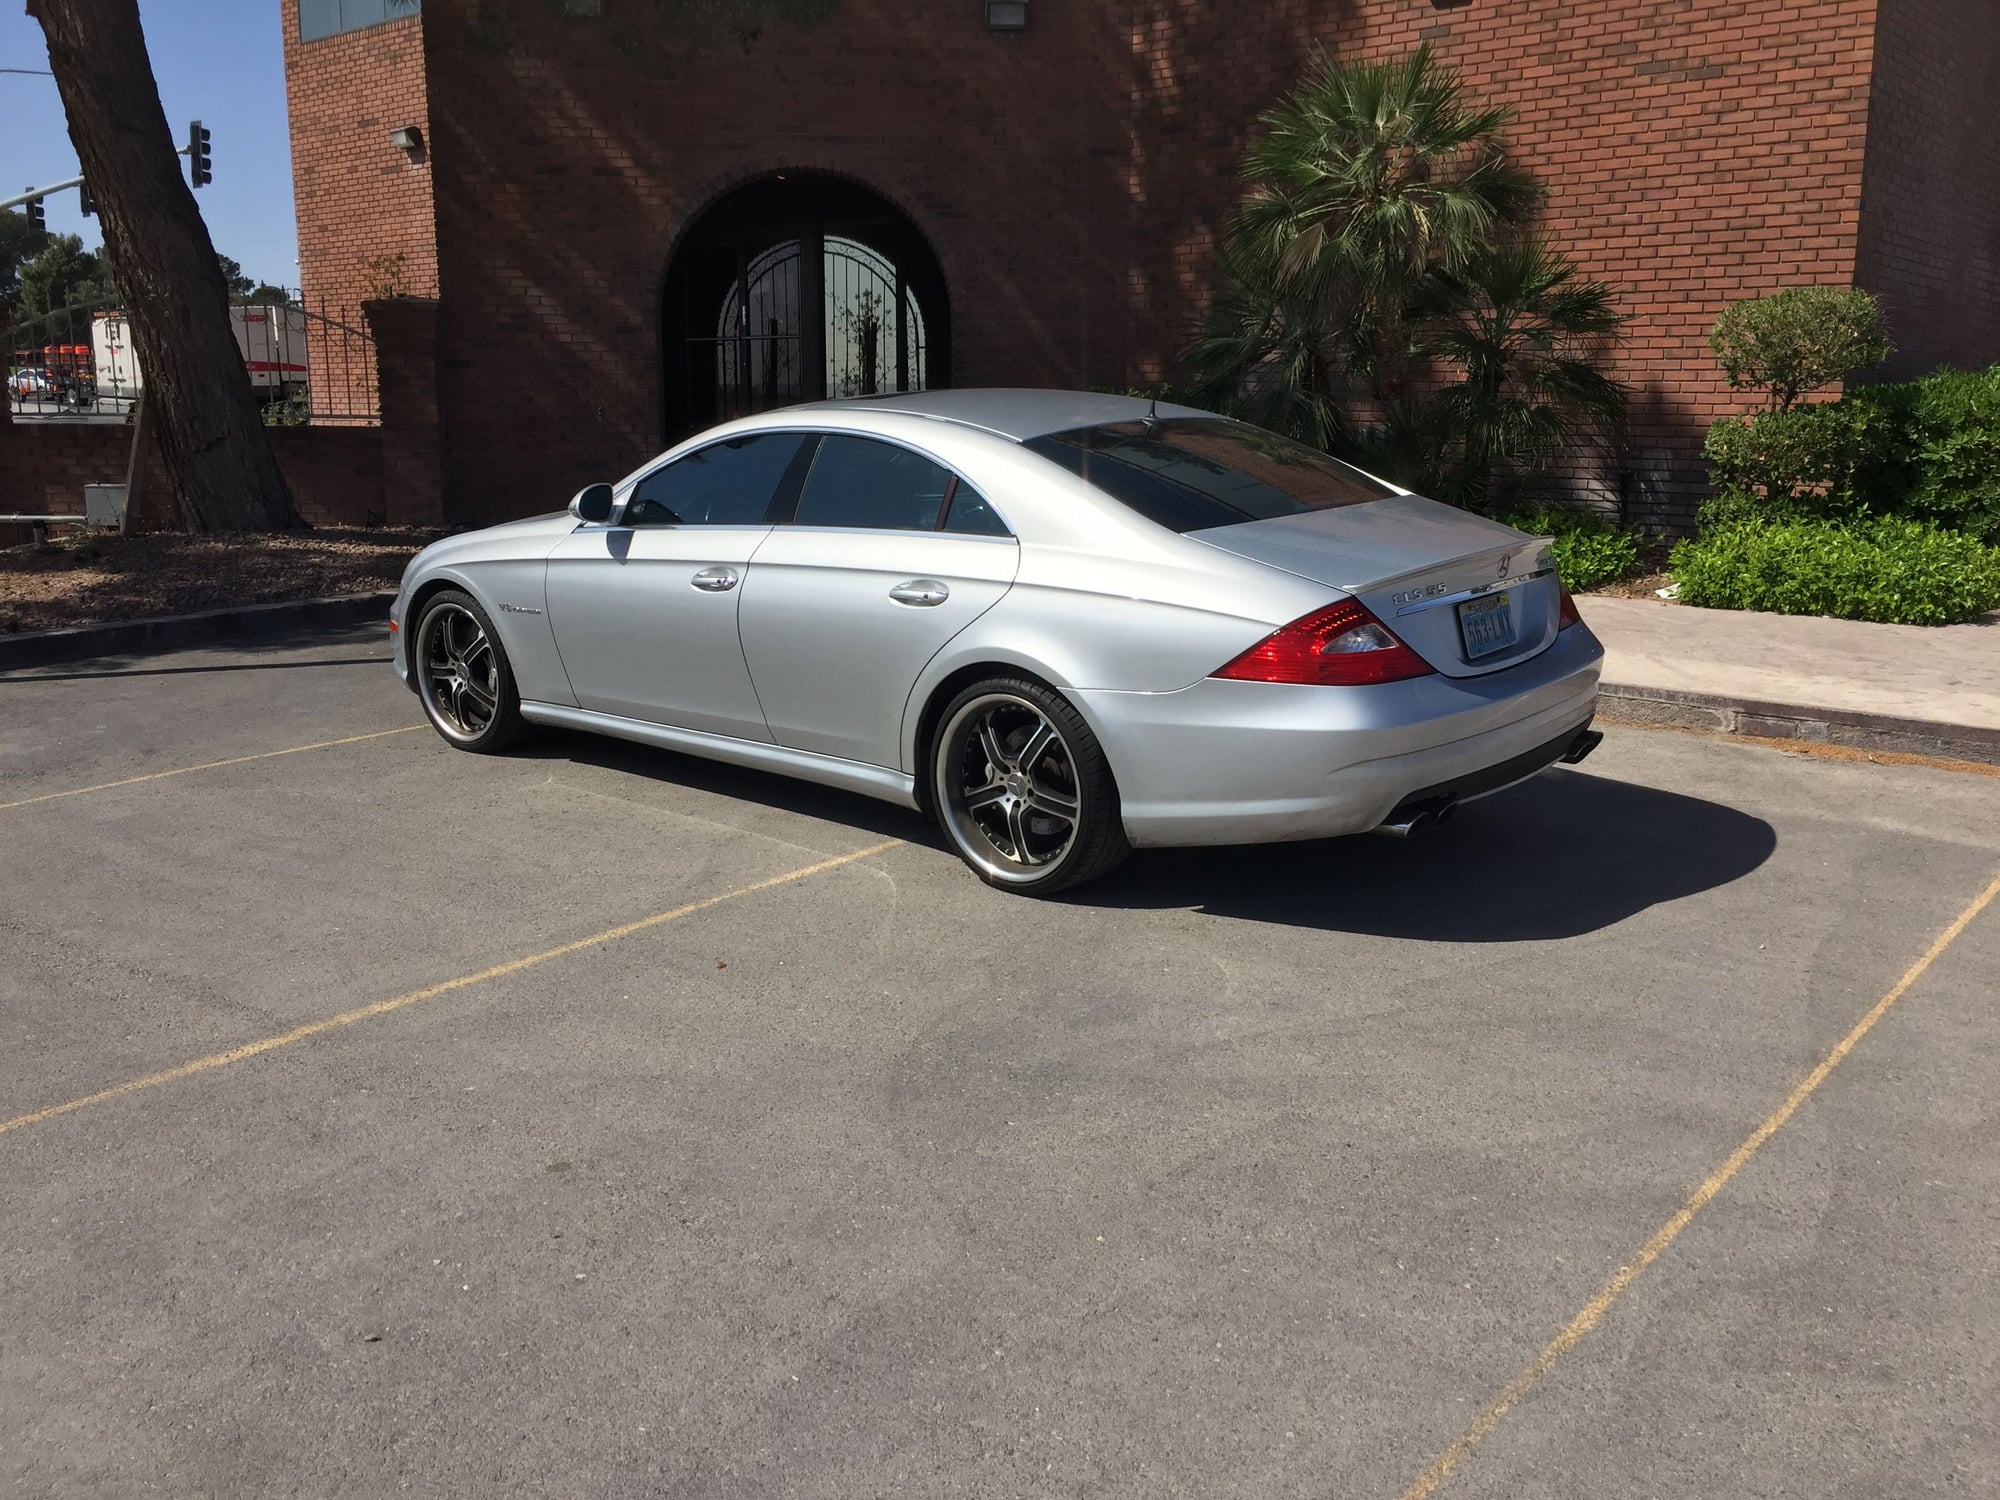 2006 Mercedes-Benz CLS55 AMG - 2006 CLS55 AMG P030 Performance Package CLS 55 - Used - VIN wdddj76x46a065017 - 119,000 Miles - 8 cyl - 2WD - Automatic - Sedan - Black - Las Vegas, NV 89131, United States